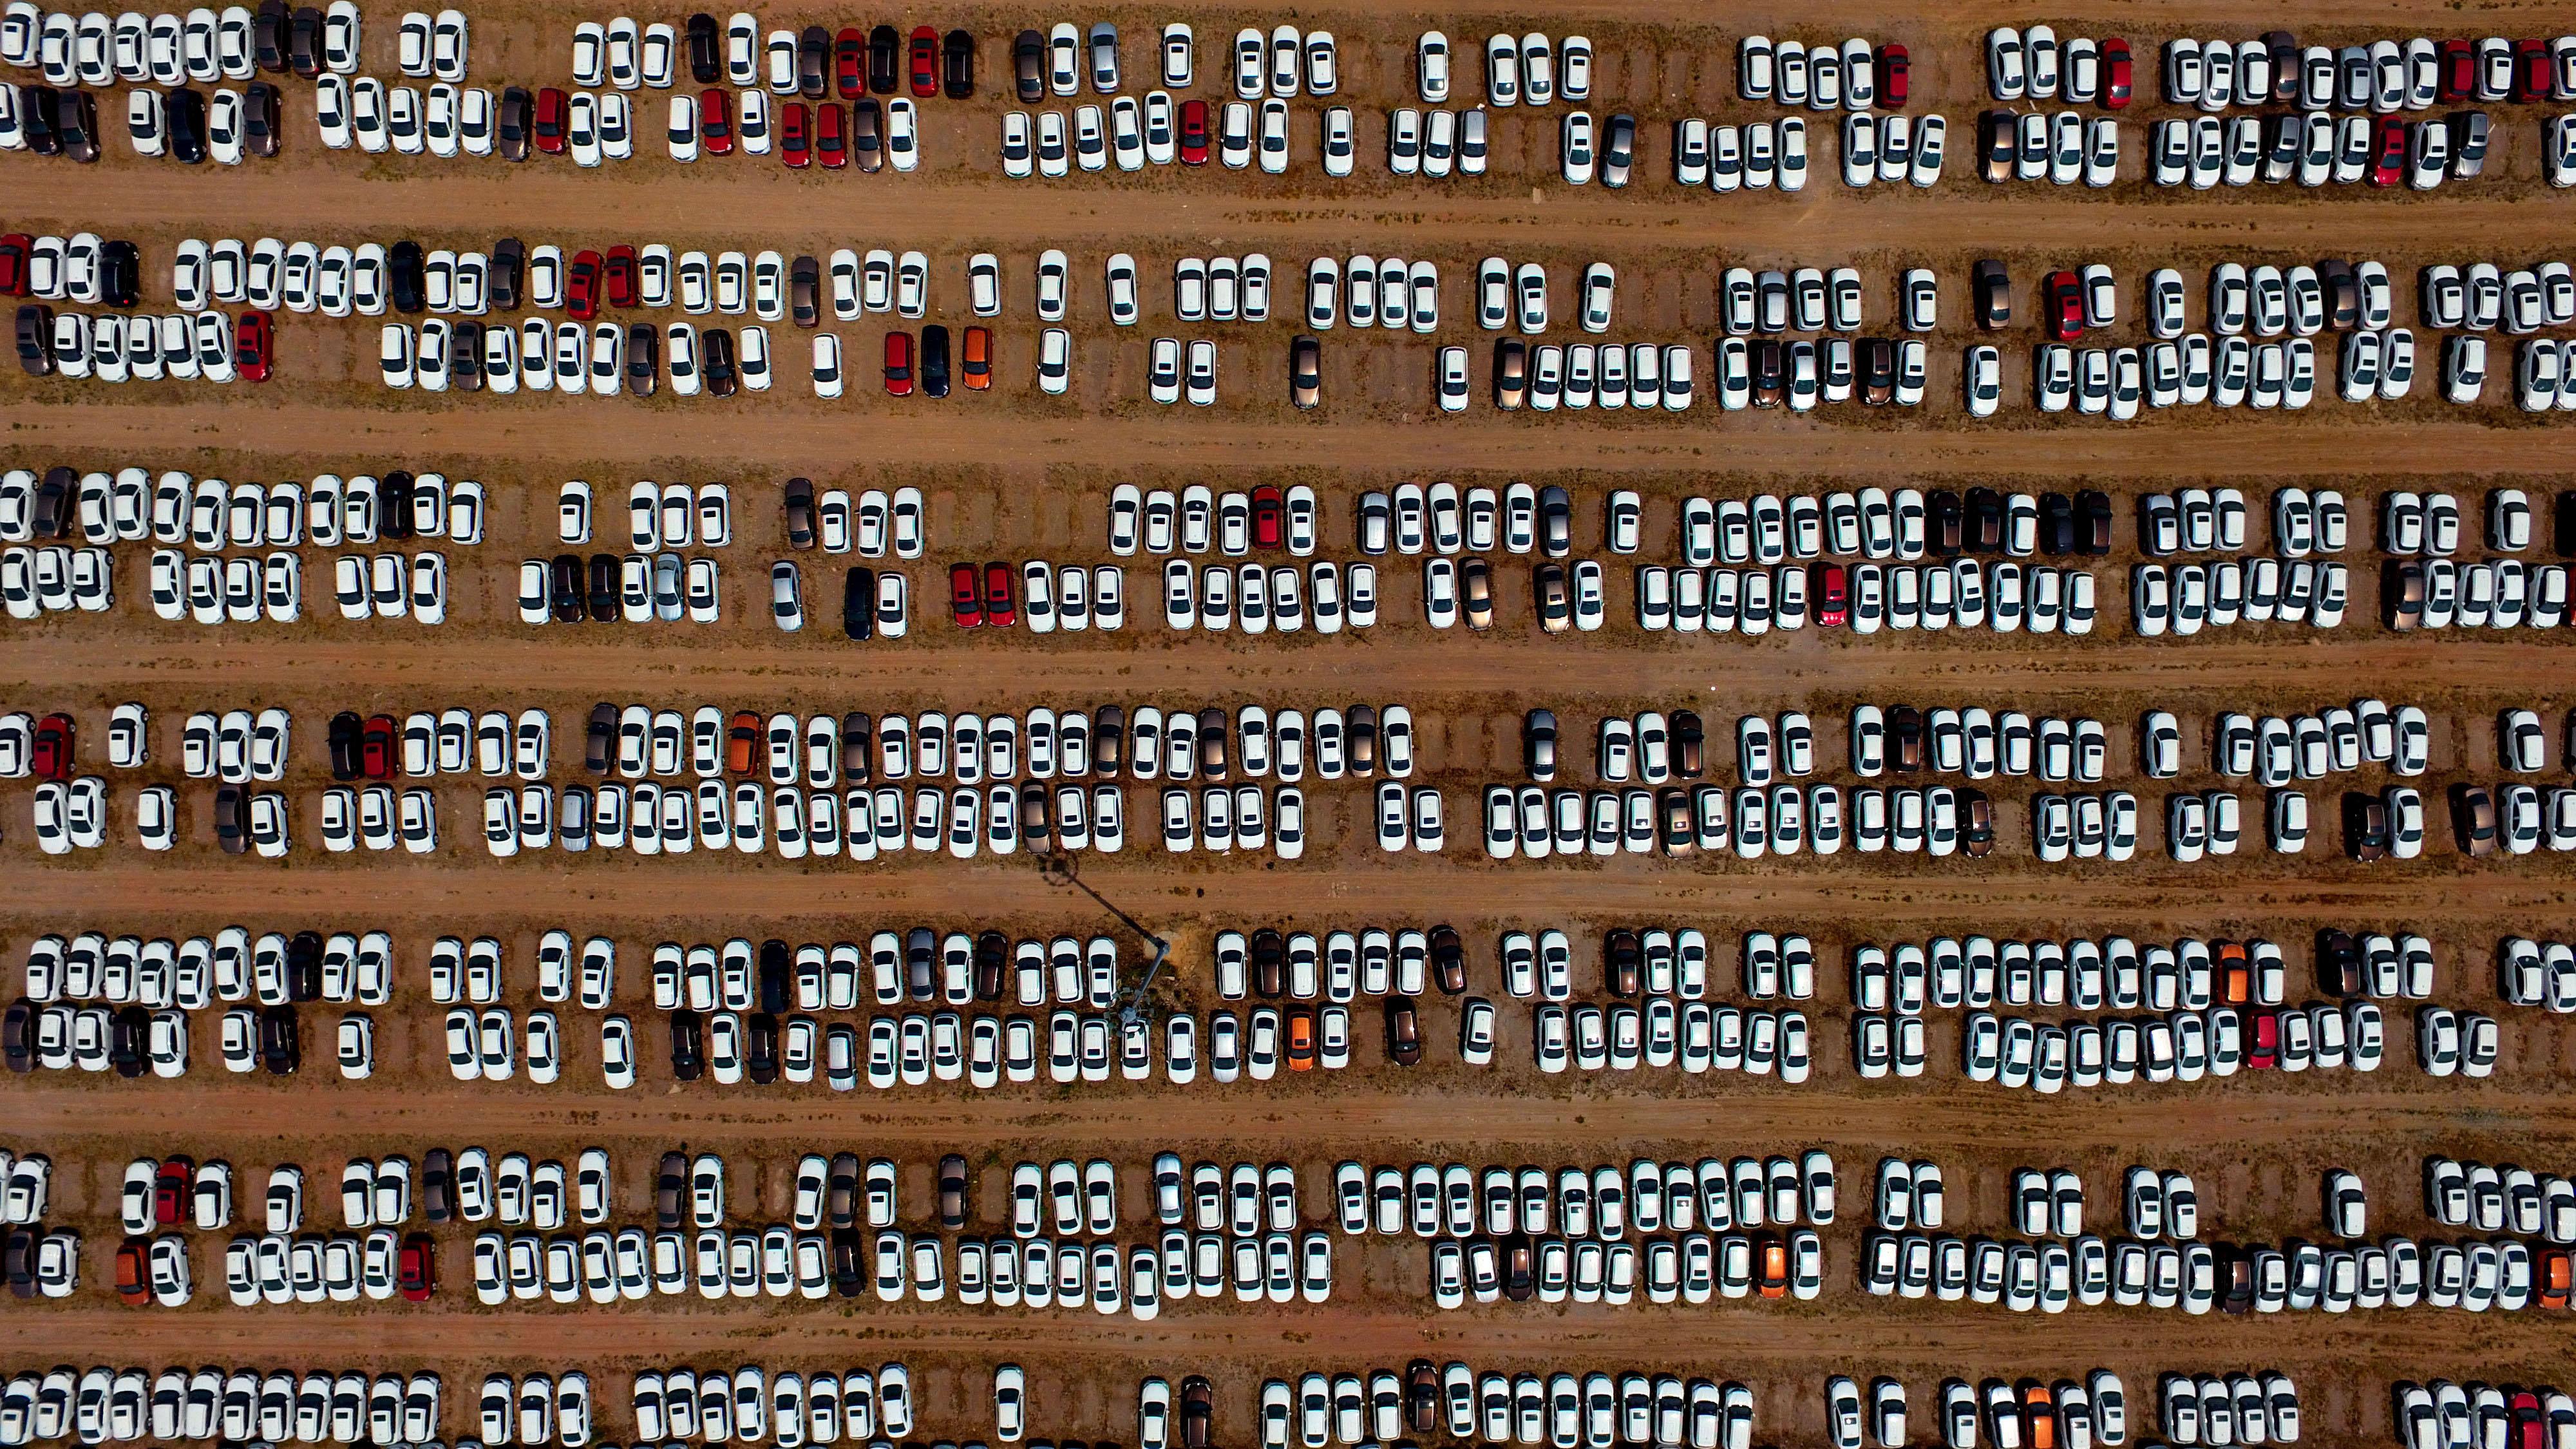 Thousands of New Cars in China